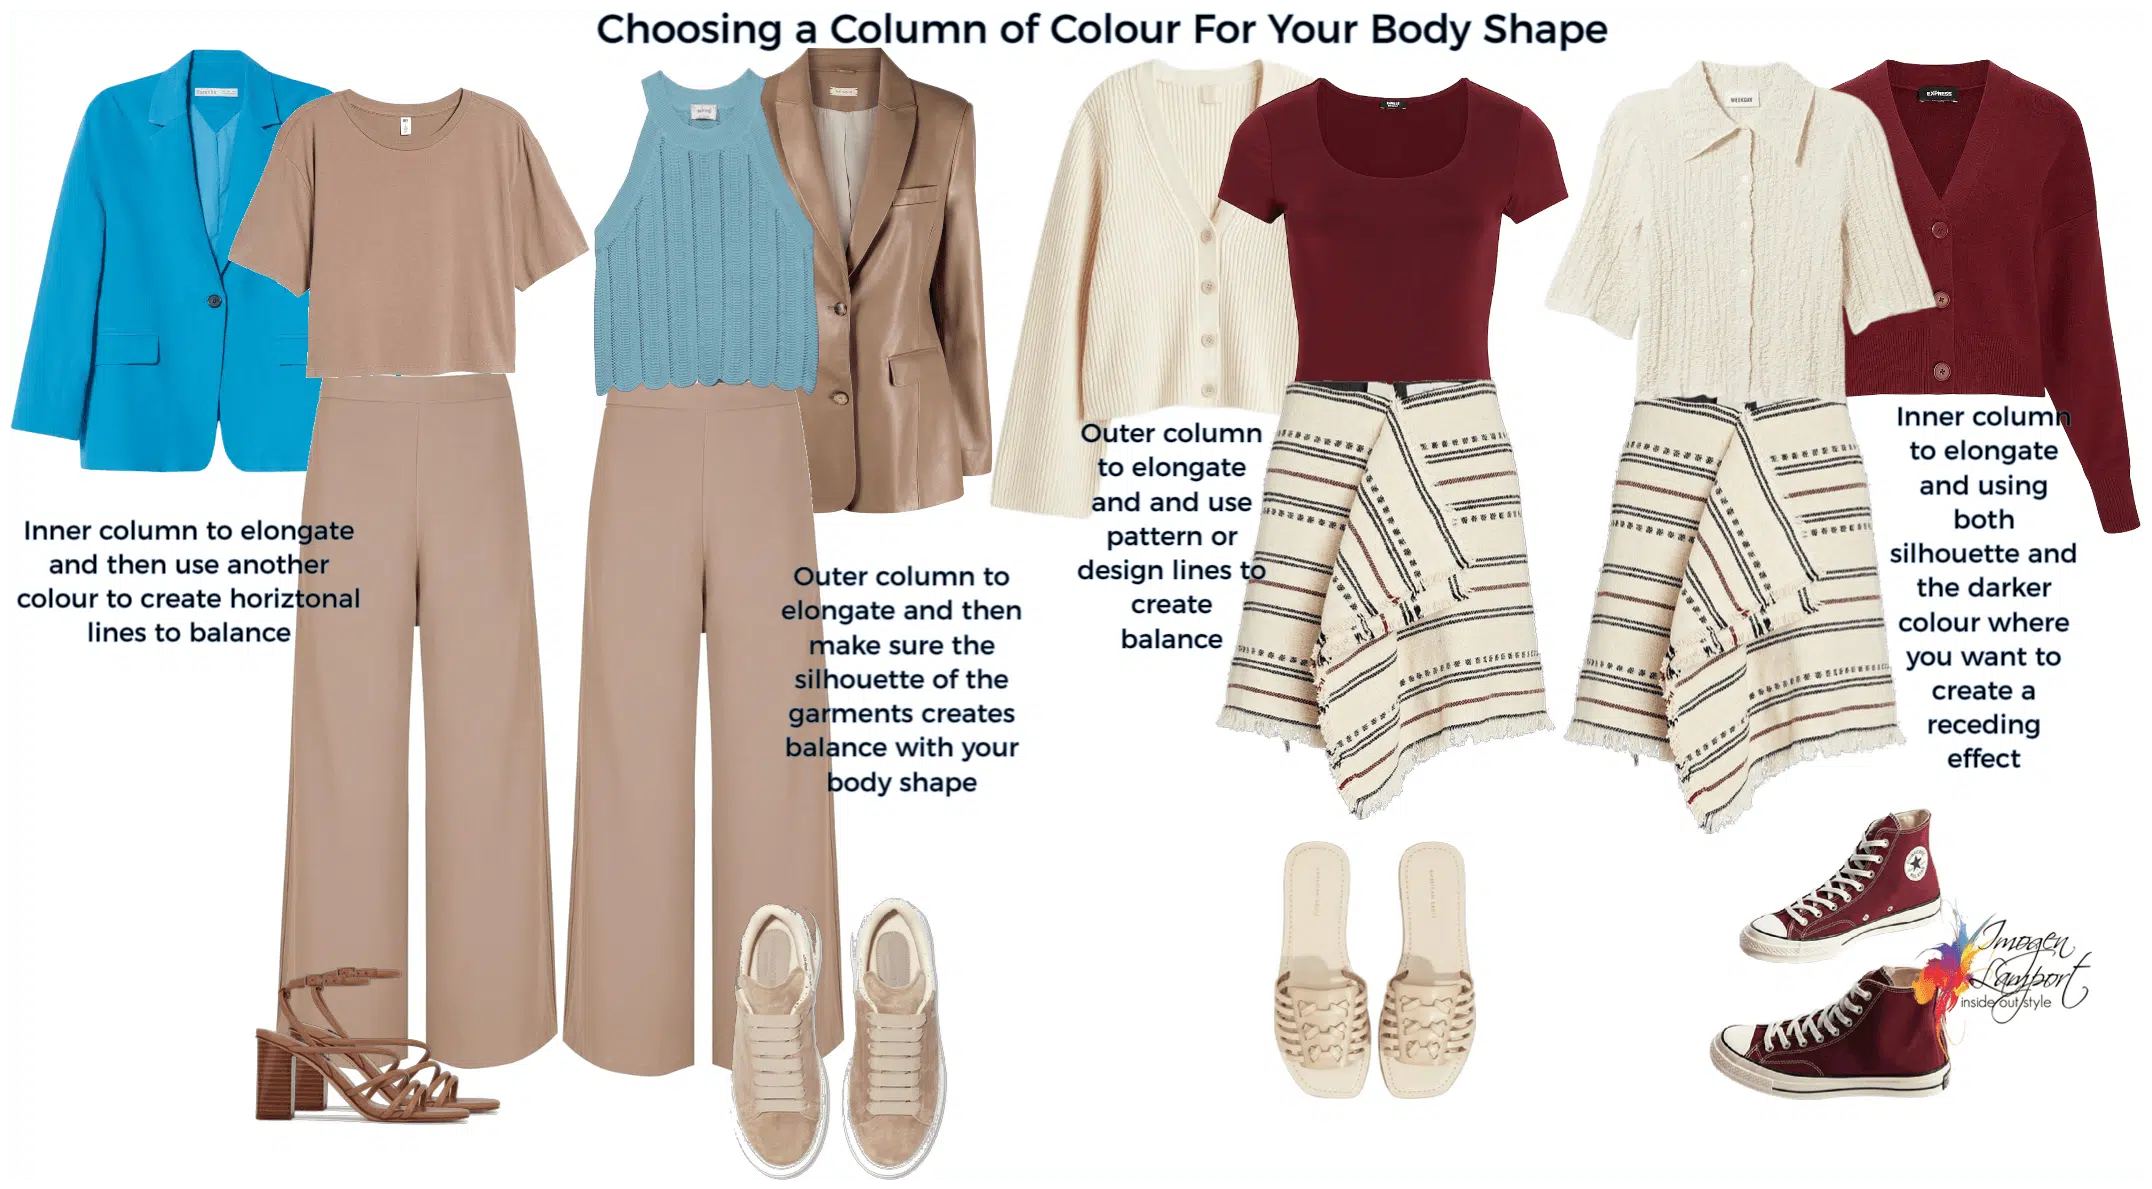 Choosing a column of colour to flatter your body shape